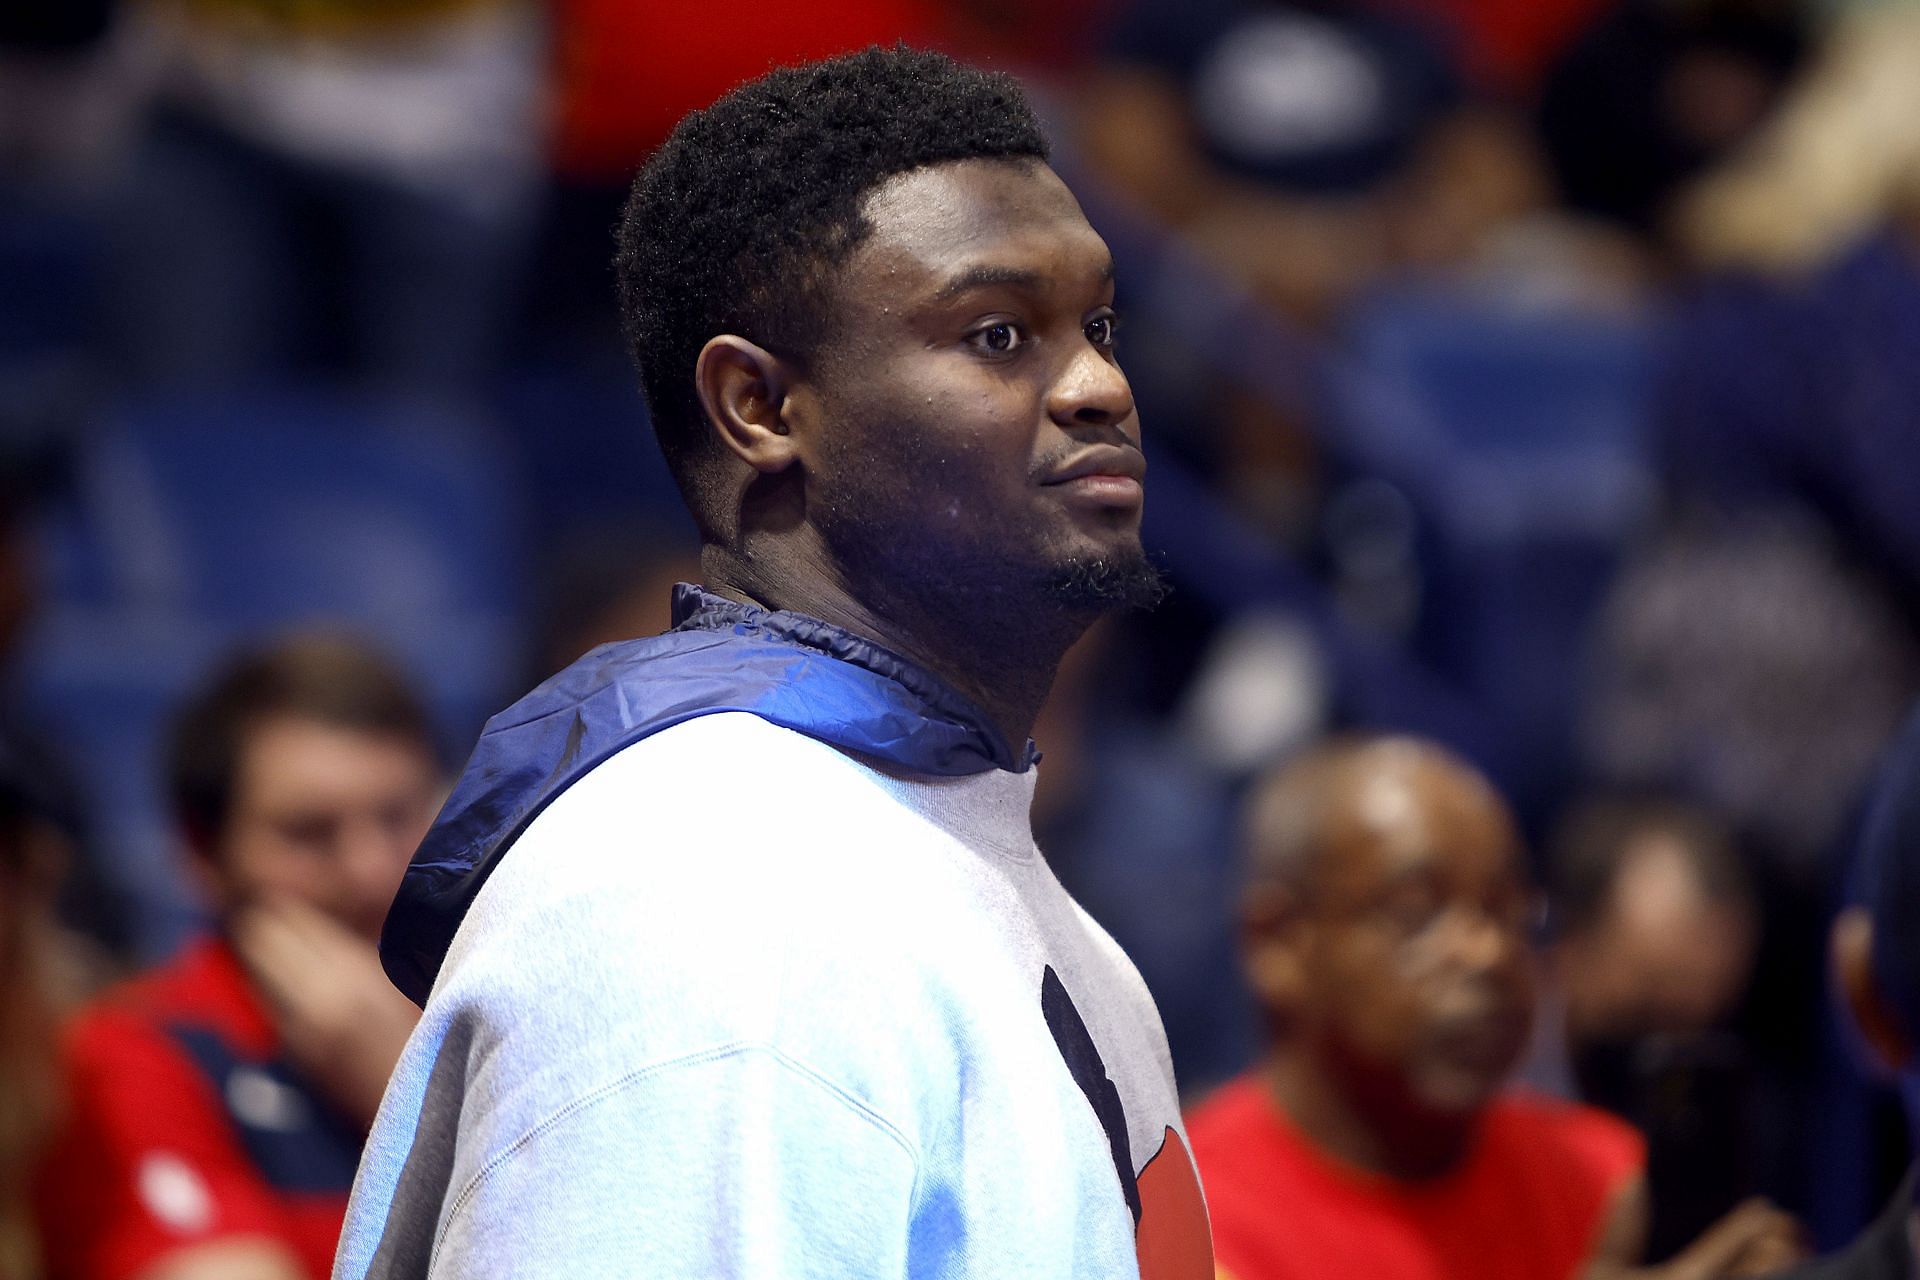 Zion Williamson will miss the entire 2022 NBA season due to a foot injury.